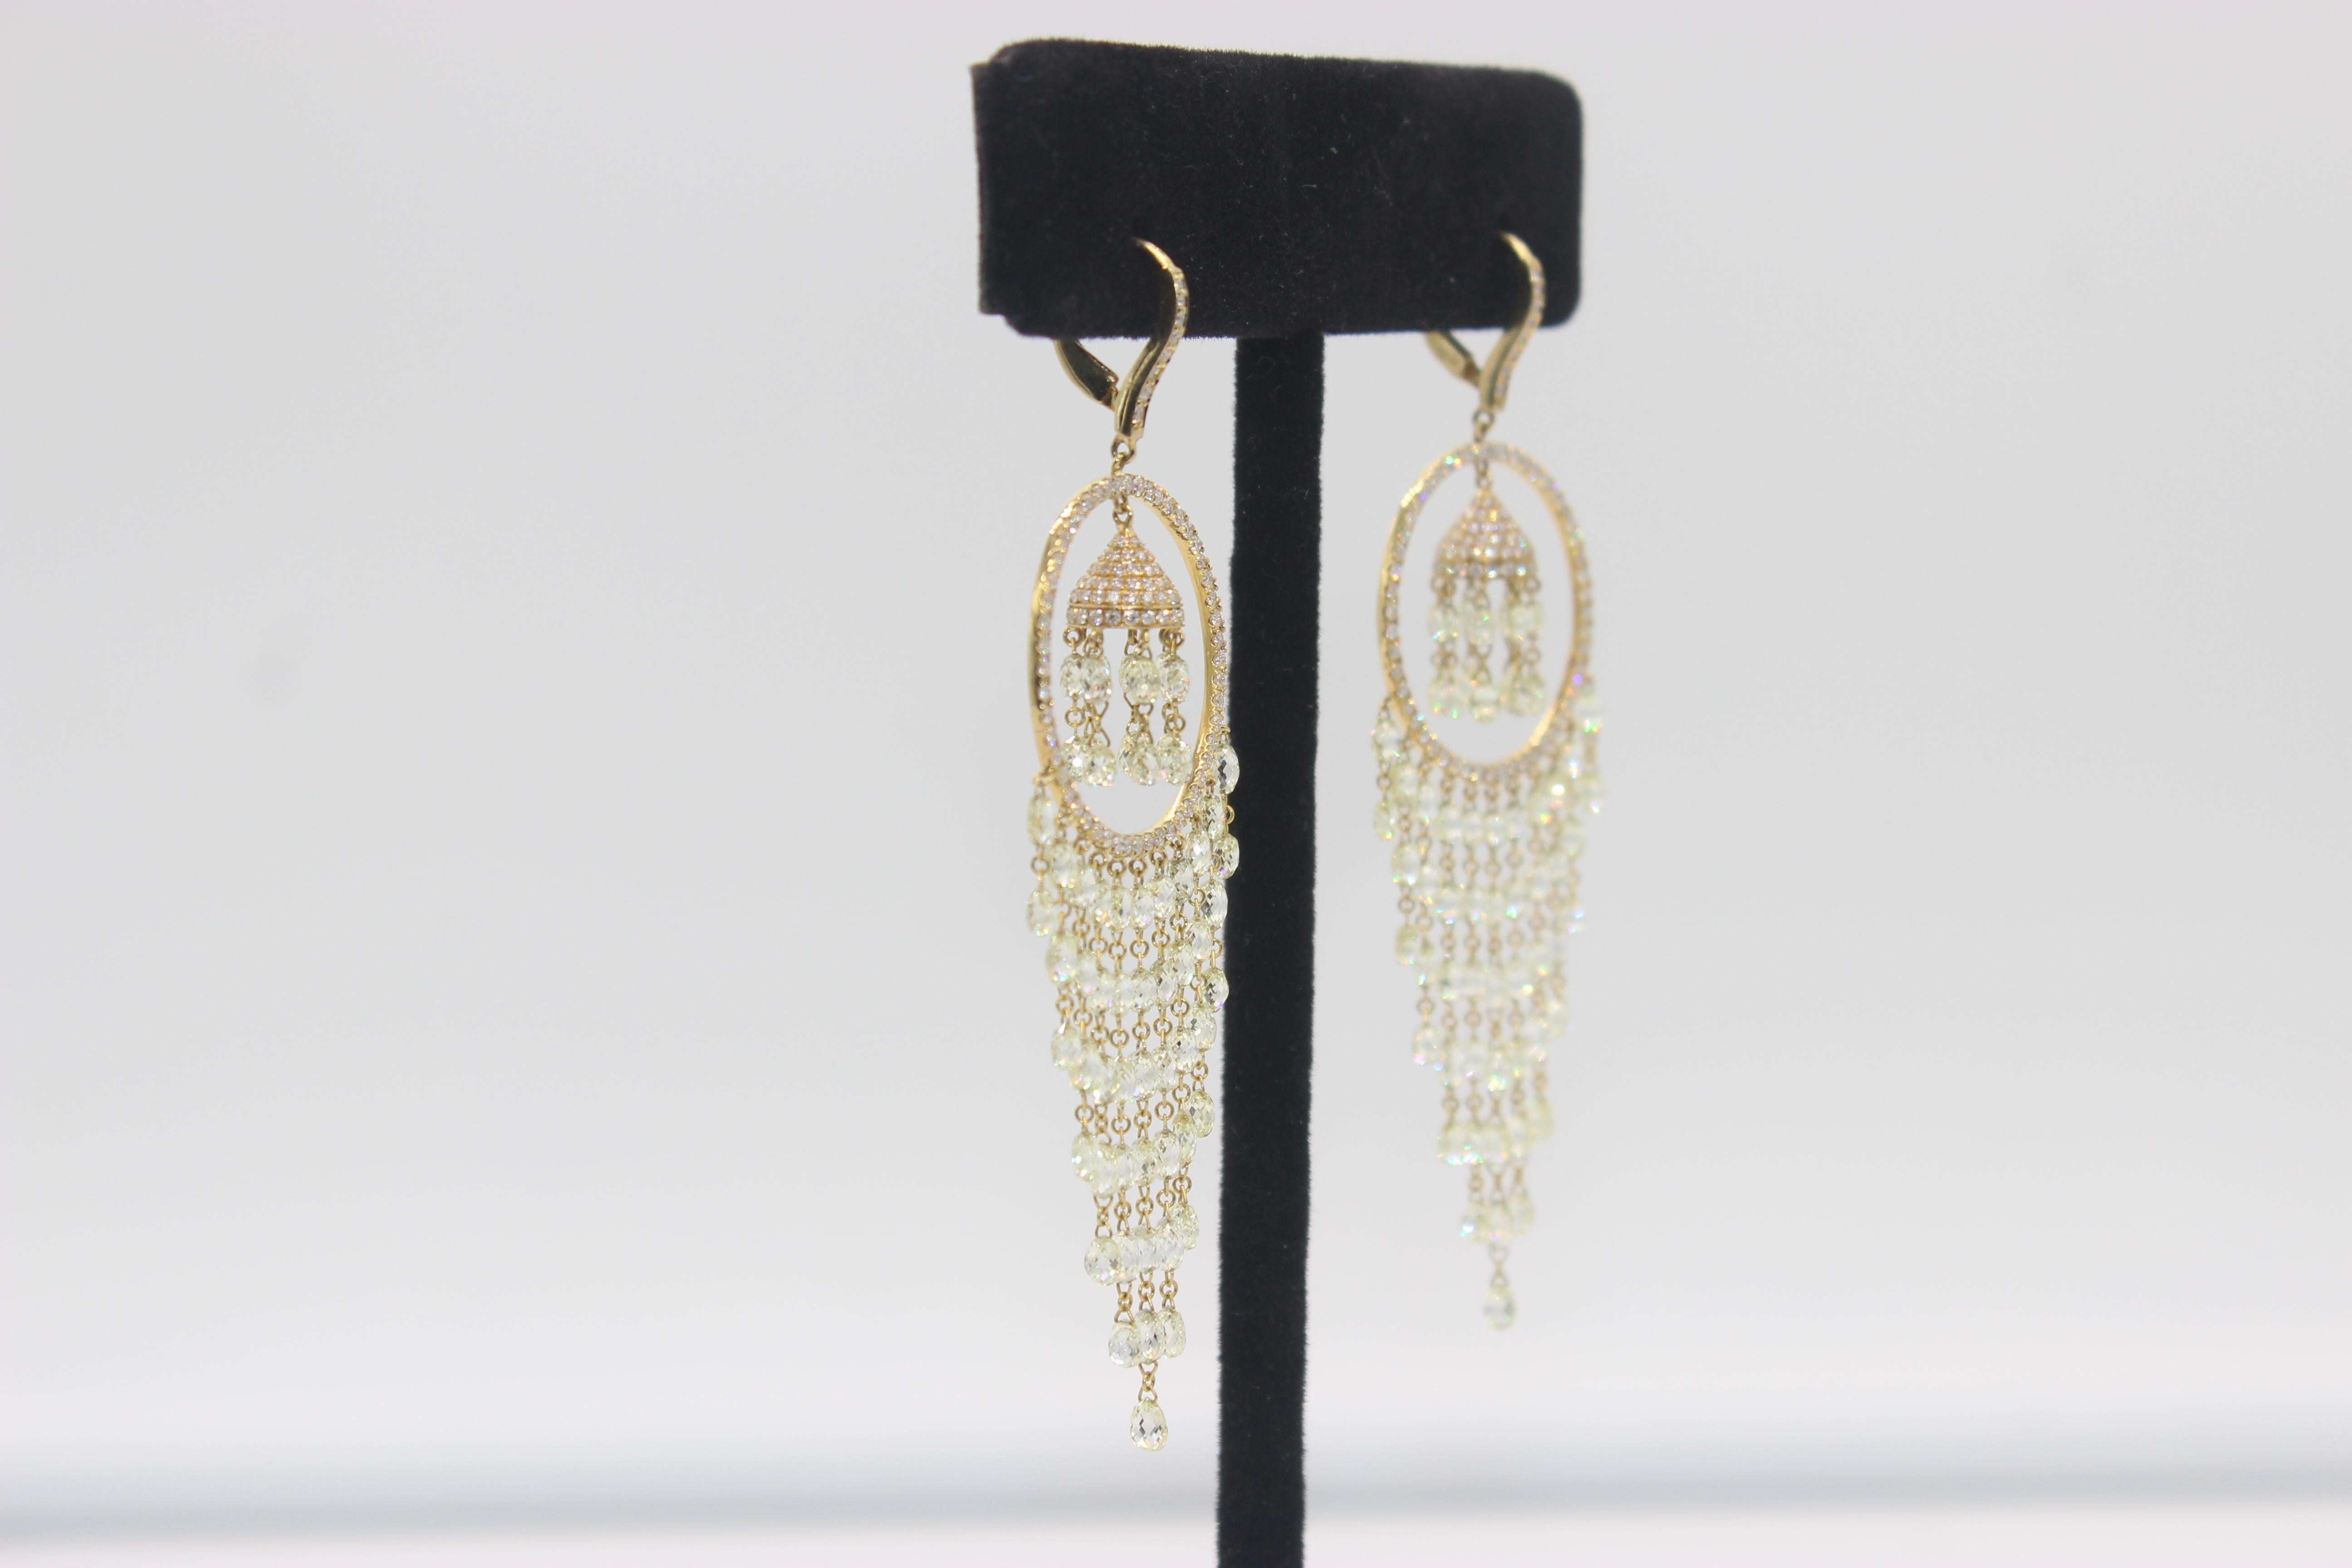 PANIM 22.41cts Diamond Briolette 18K Yellow Gold Earrings In New Condition For Sale In Tsim Sha Tsui, Hong Kong